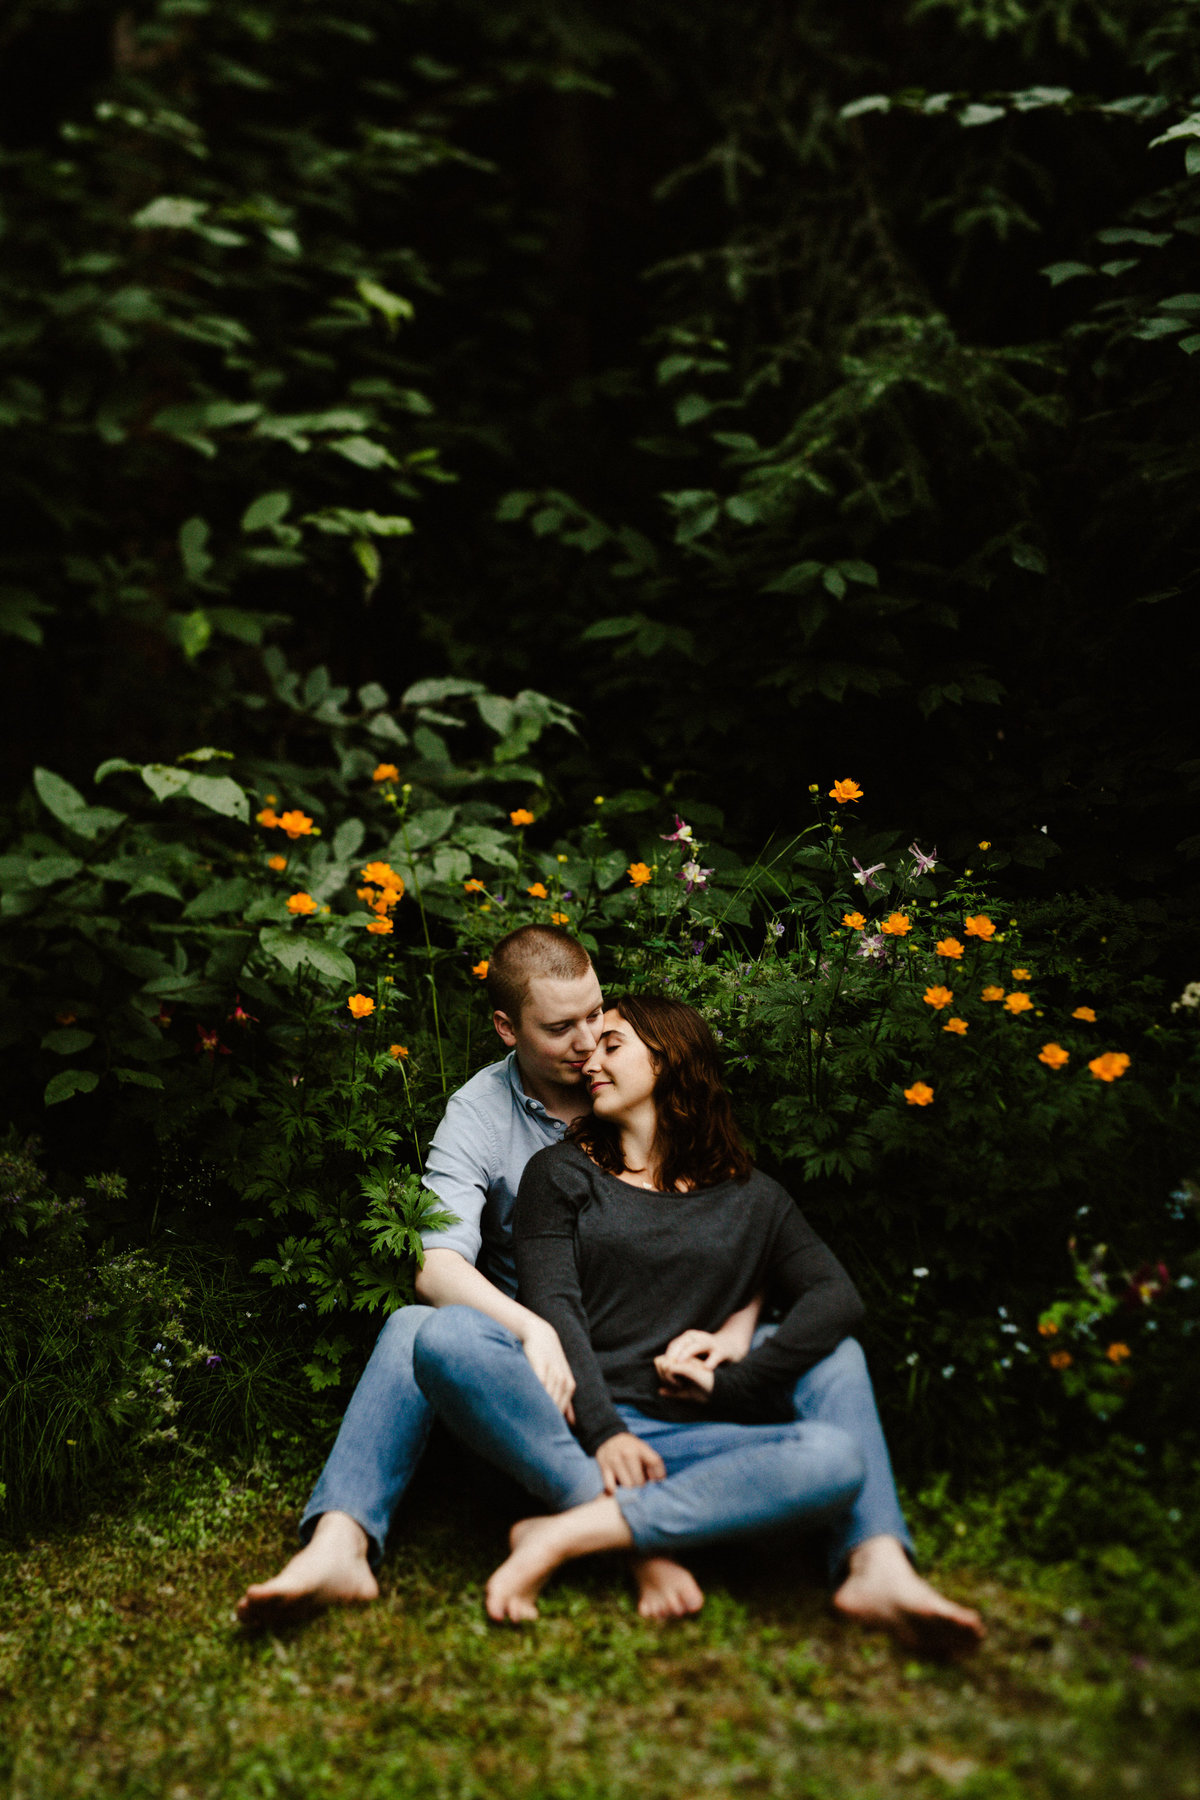 couple sits in garden surrounded by orange wildflowers